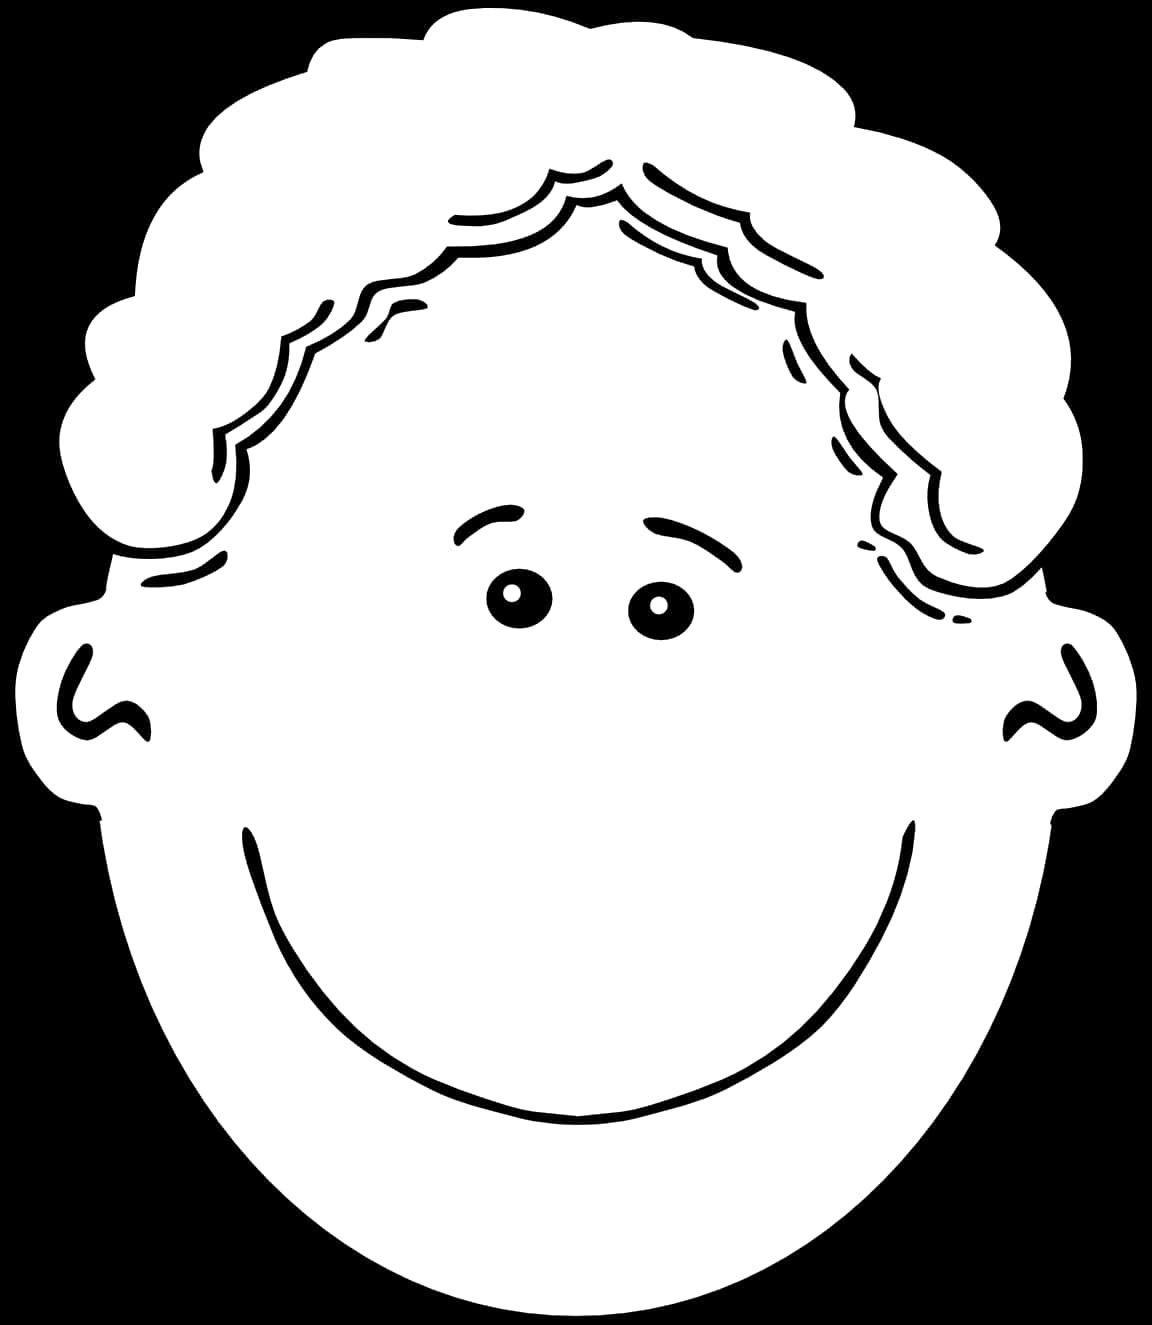 Smiling Cartoon Face Outline PNG image